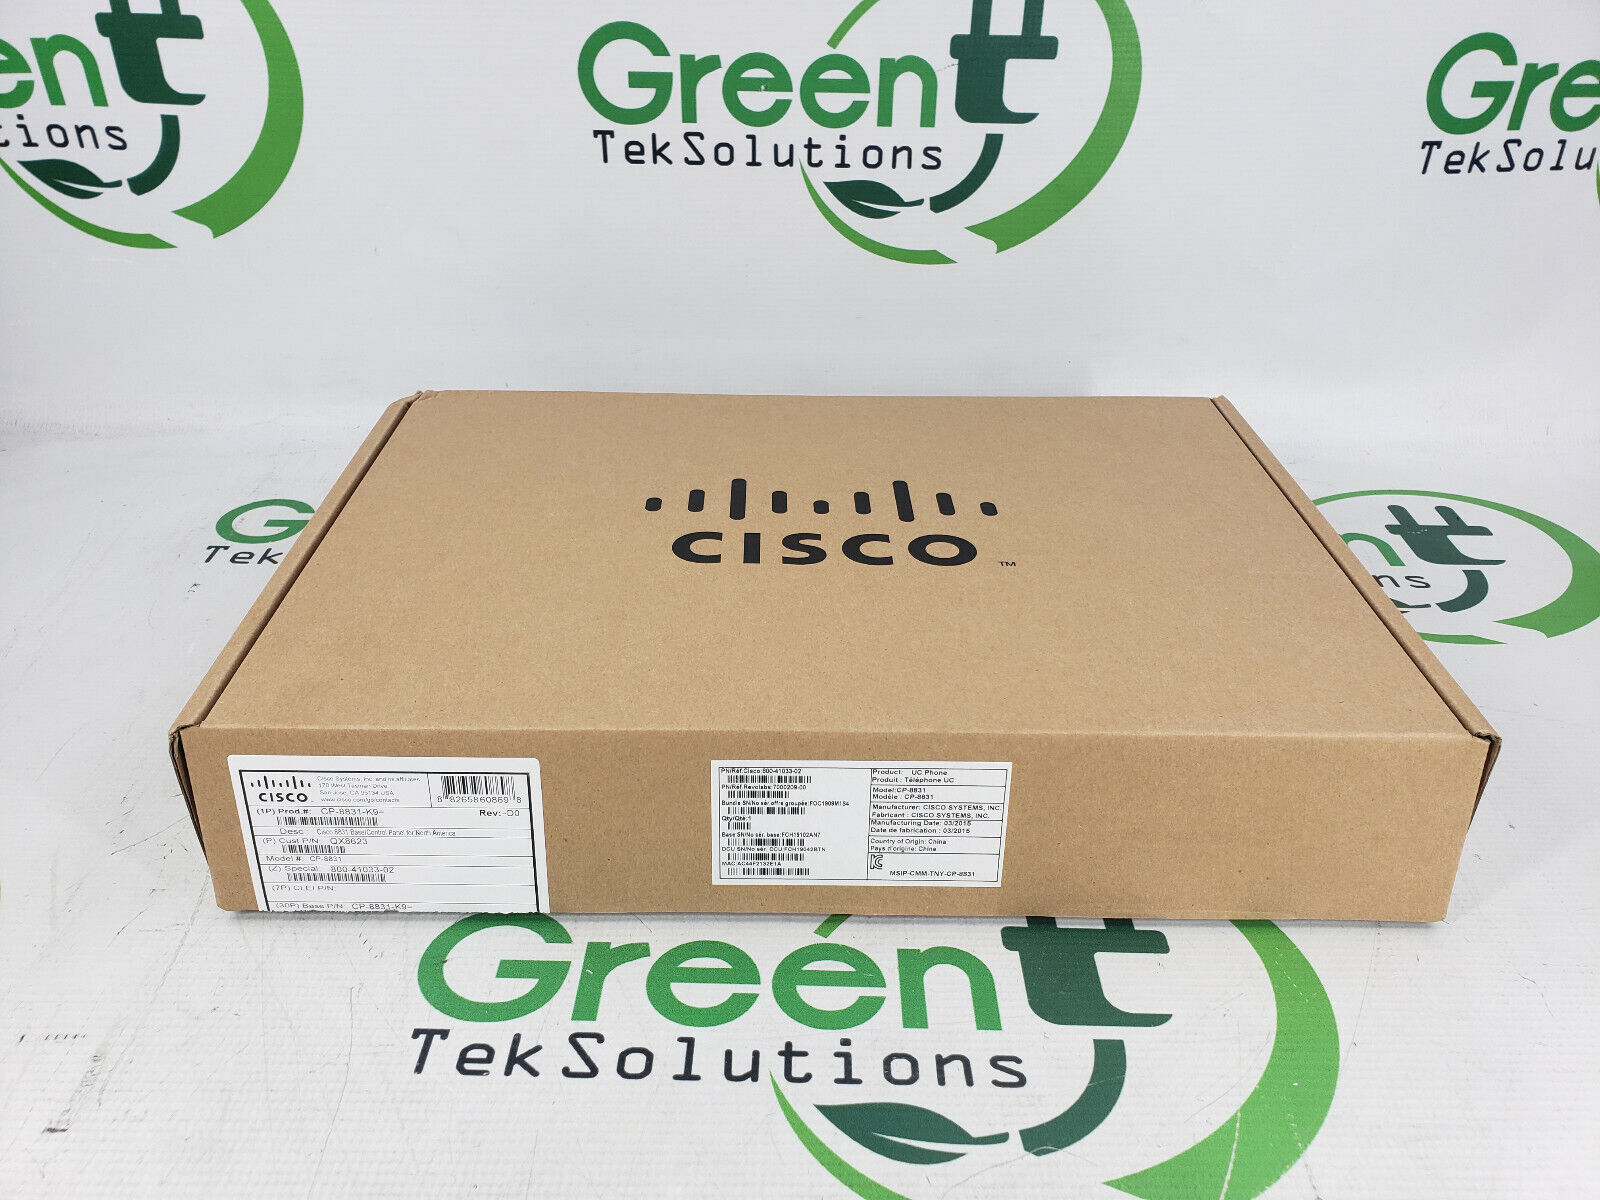 New Sealed Cisco CP-8831-K9 Unified IP Conference Phone Base and Control Unit